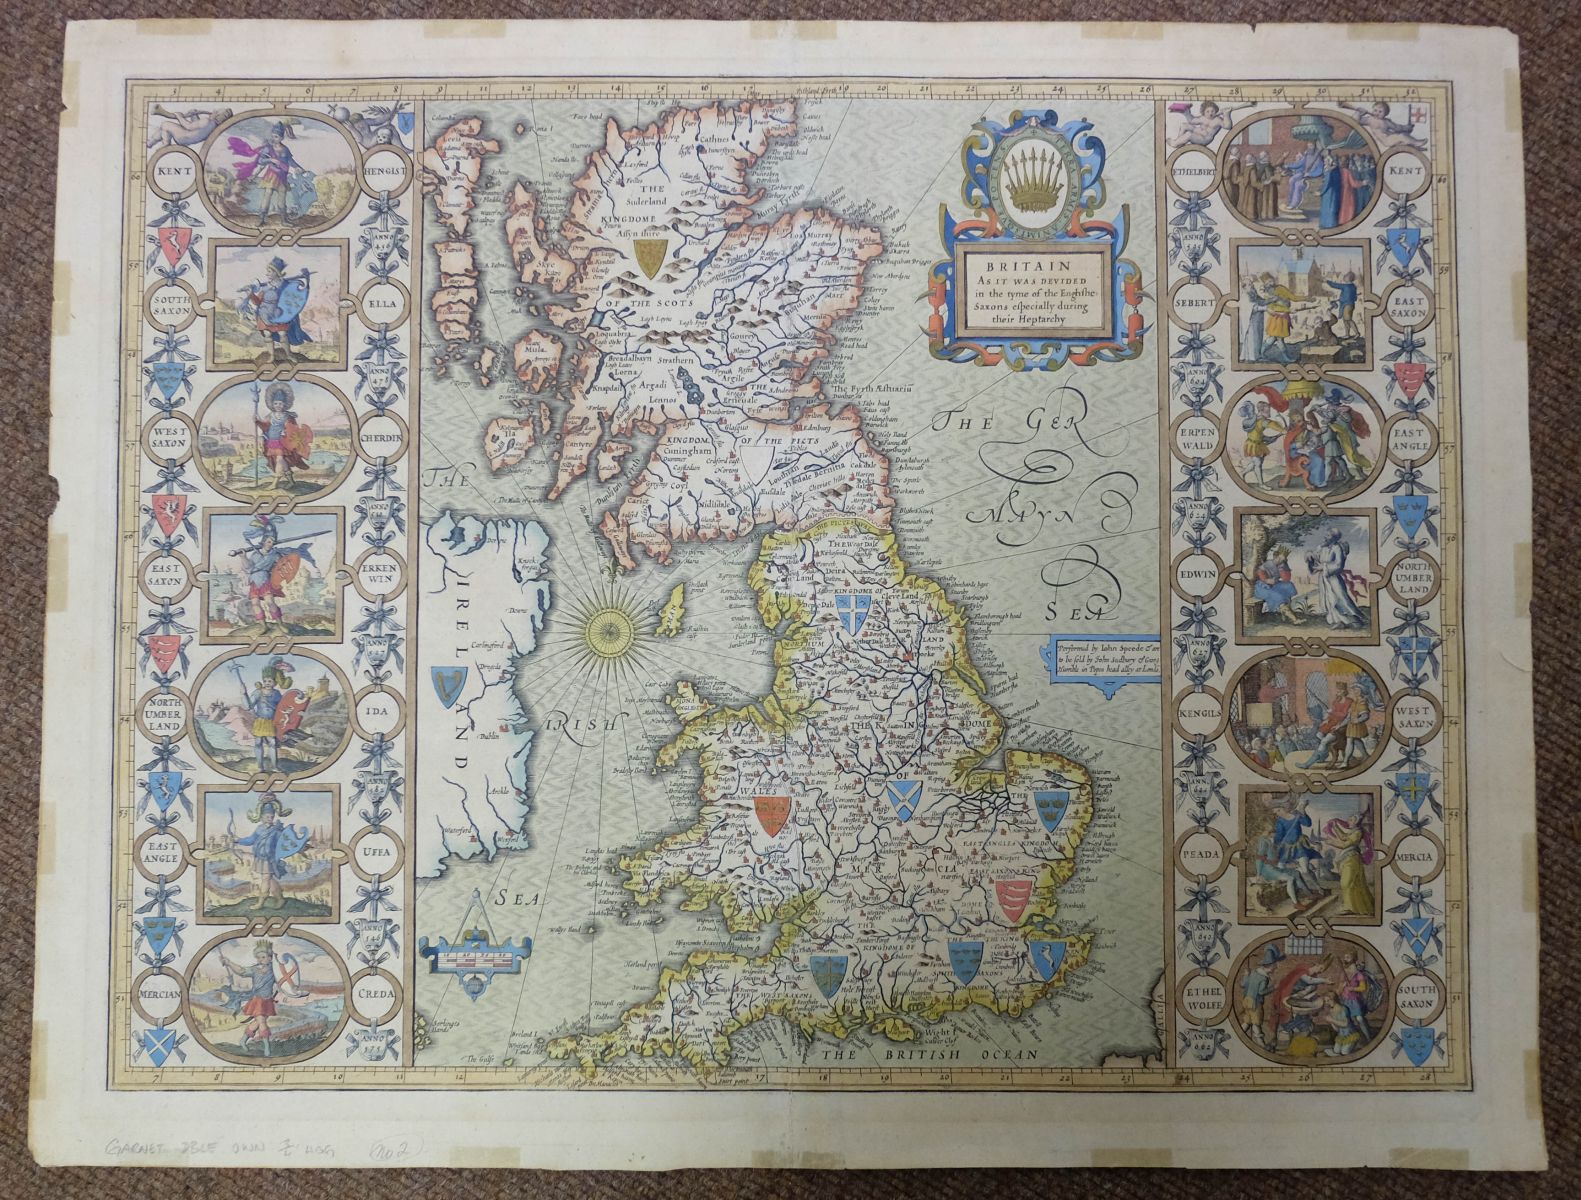 British Isles. Speed (John), Britain as it was devided in the tyme of the English Saxons..., 1627 - Image 2 of 3